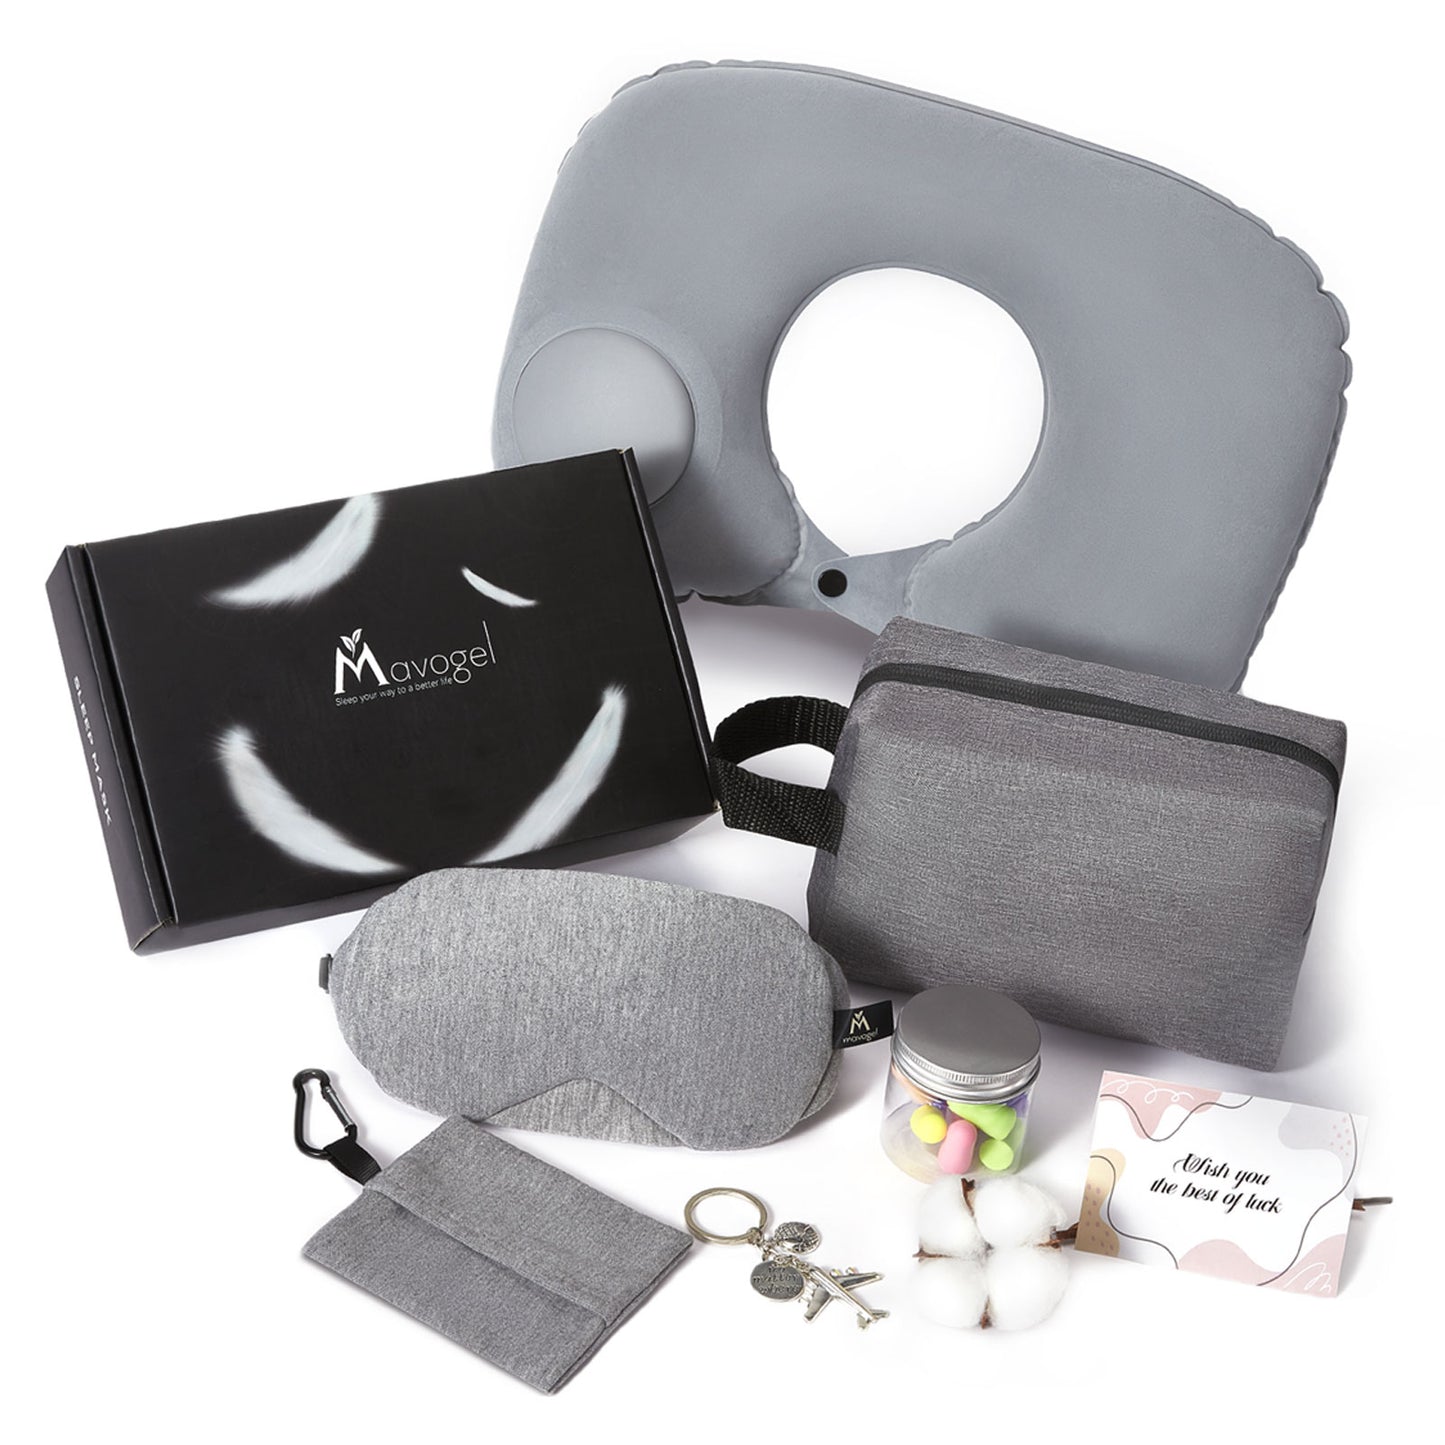 Mavogel Sleep Mask Gift Set - Cotton Sleep Eye Mask with Inflatable Neck Pillow, Travel Toiletry Bag, Carry Pouch and Earplugs